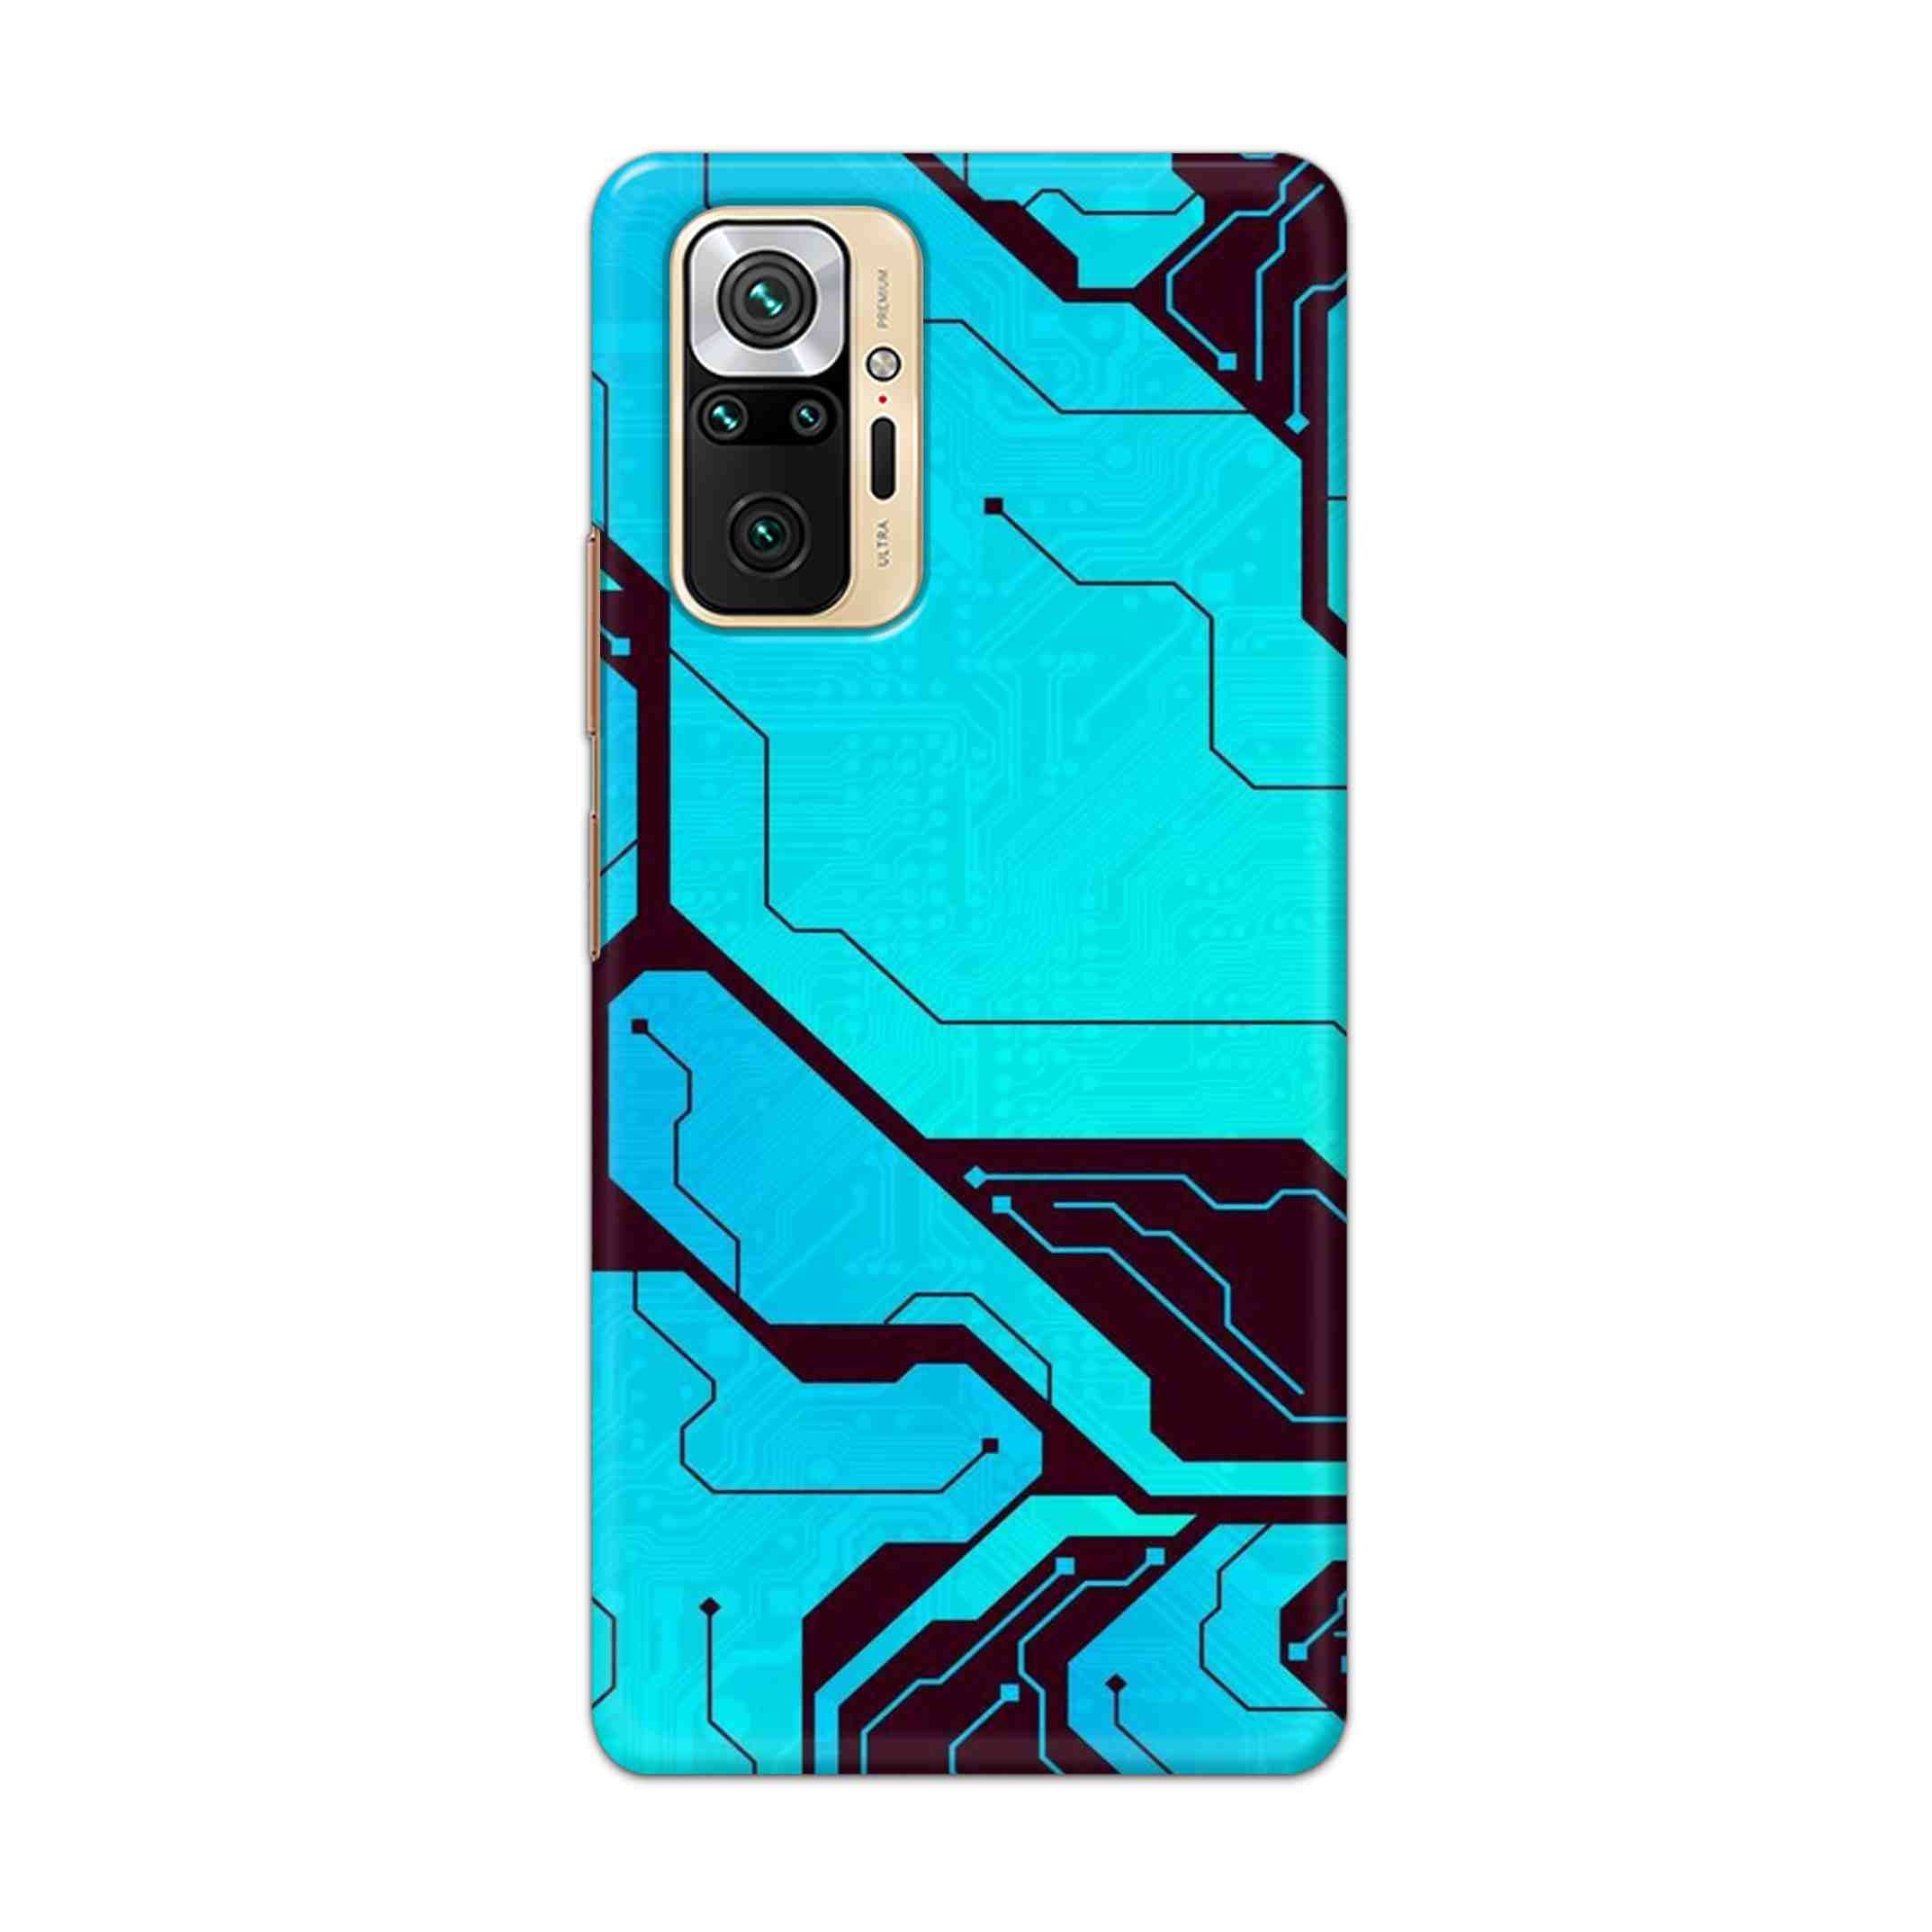 Buy Futuristic Line Hard Back Mobile Phone Case Cover For Redmi Note 10 Pro Online